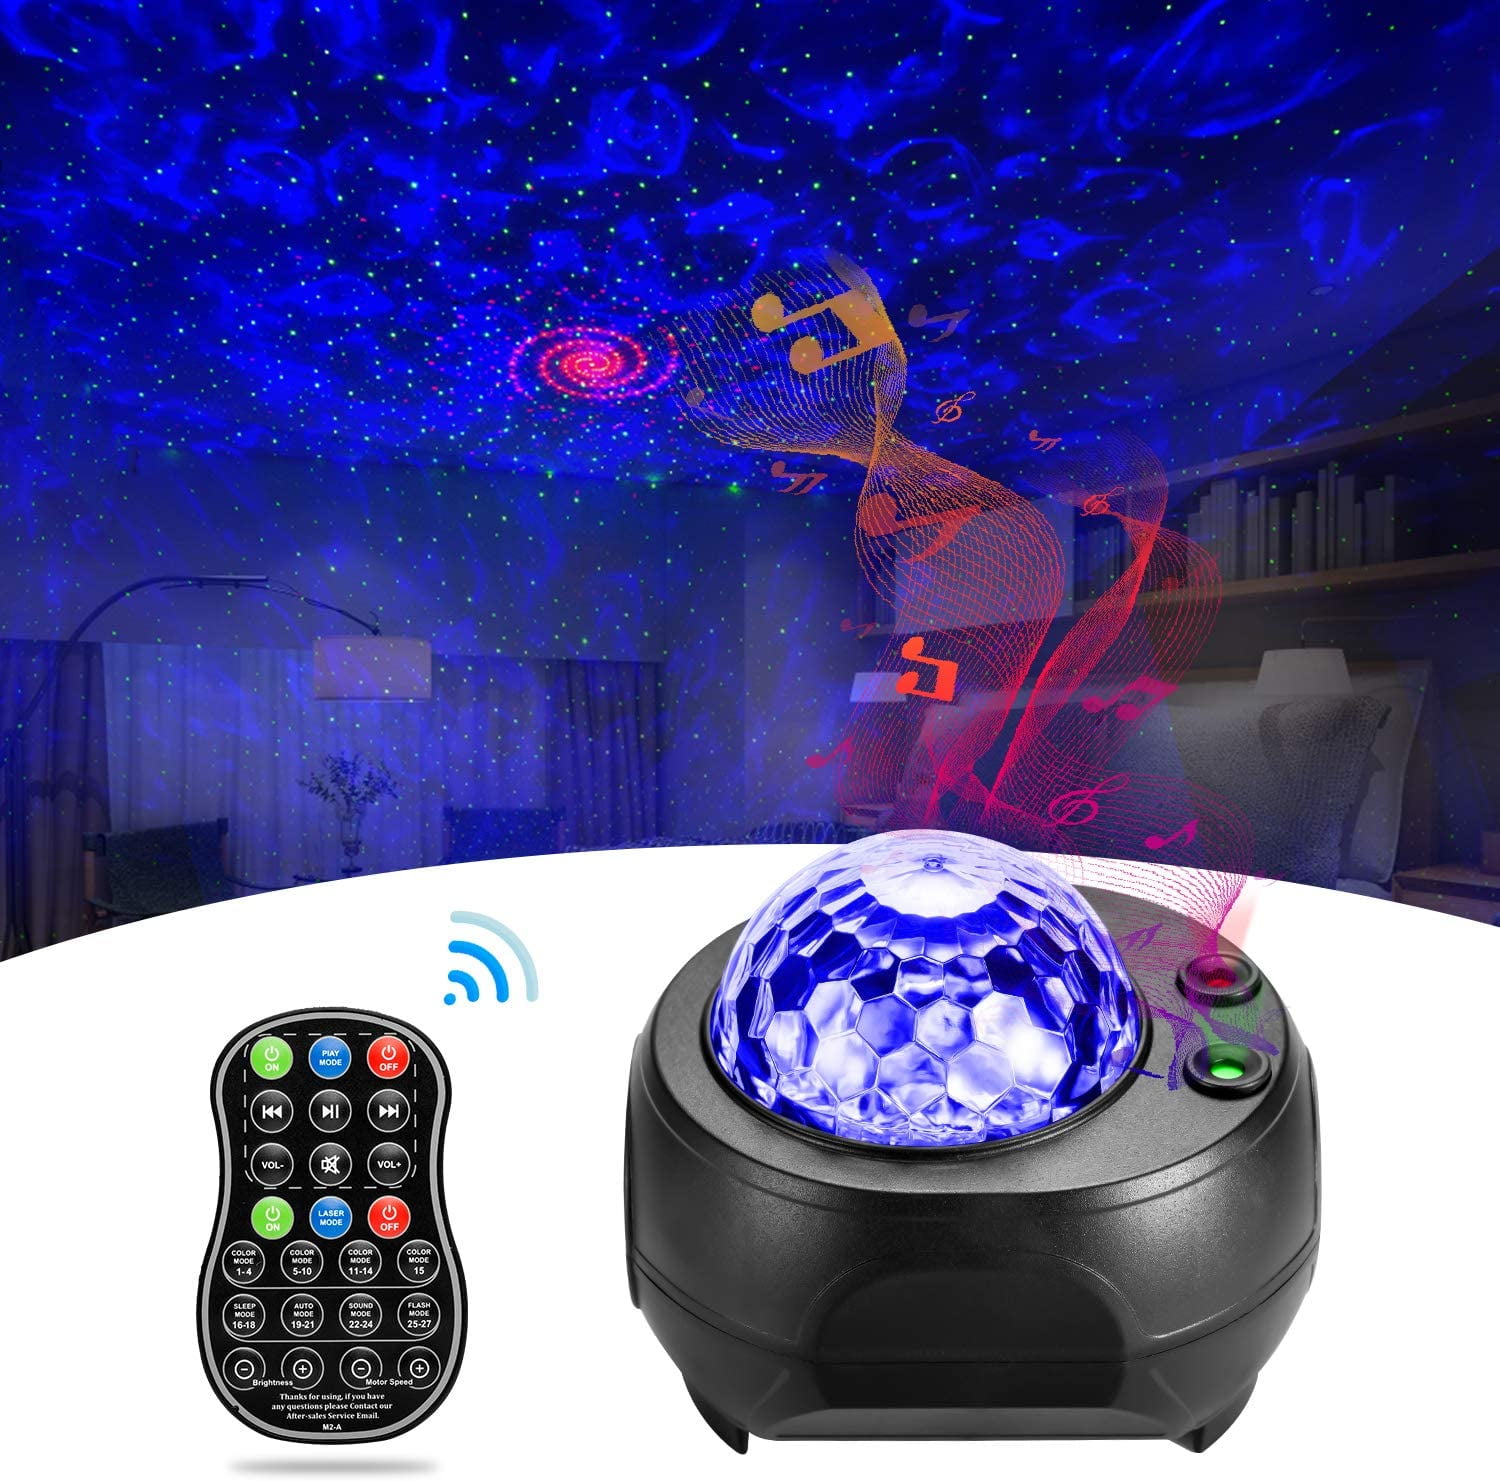 Star Projector Night Light Projector with LED Galaxy Ocean Wave Projector Bluetooth Music Speaker for Kid Adult Bedroom,Game Rooms,Party,Home Theatre,Night Light Ambiance-Black